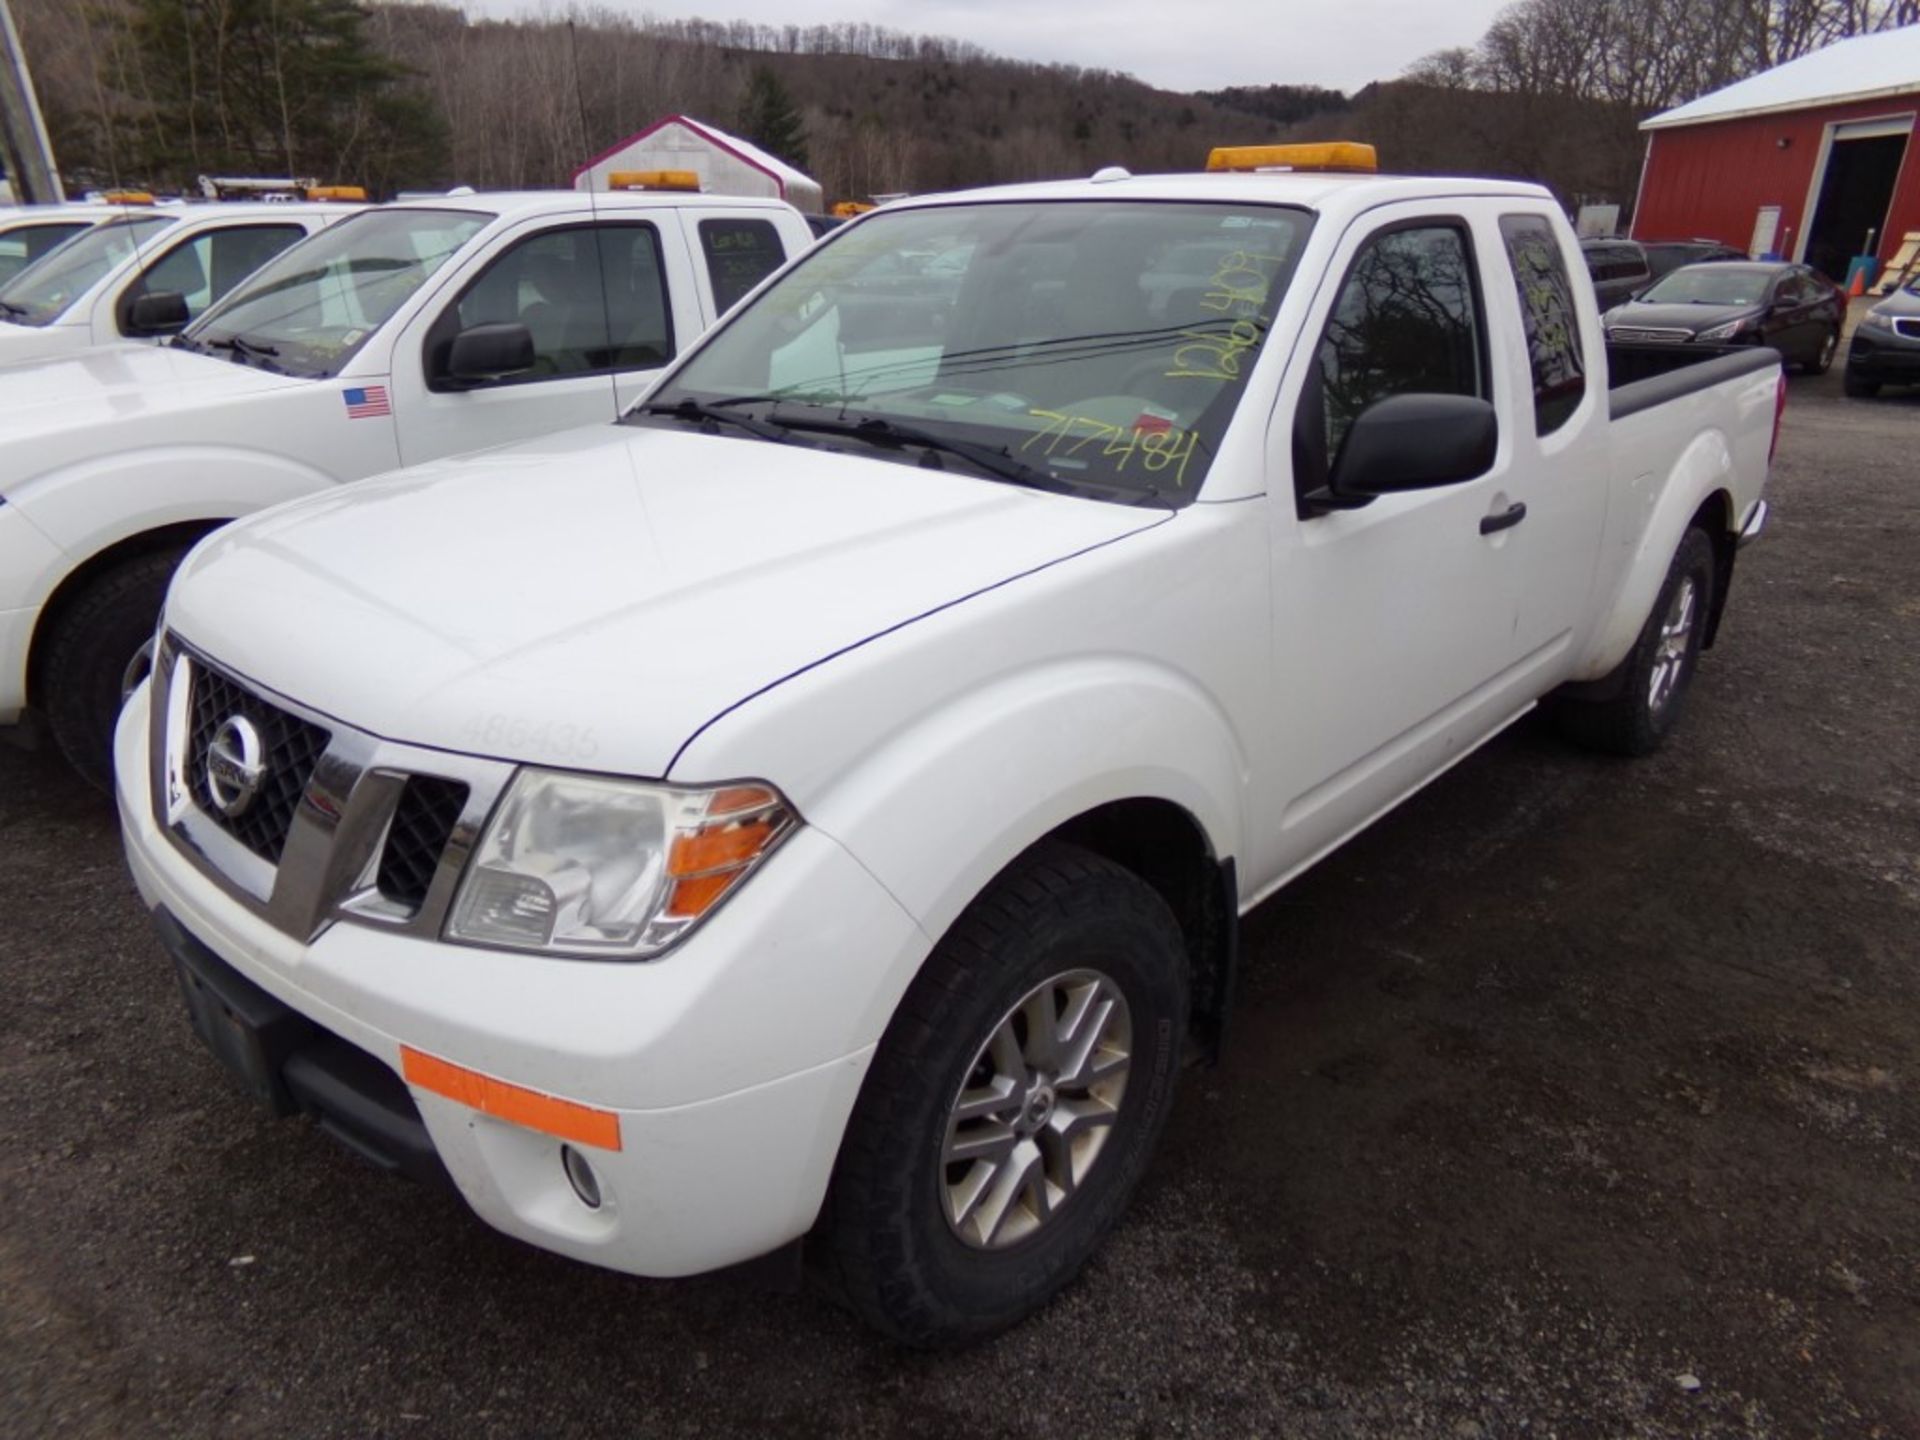 2015 Nissan Frontier SV 4 x 4 Ext. Cab, White, 126,409 Miles, Orange Light on Roof, SOME SURFACE